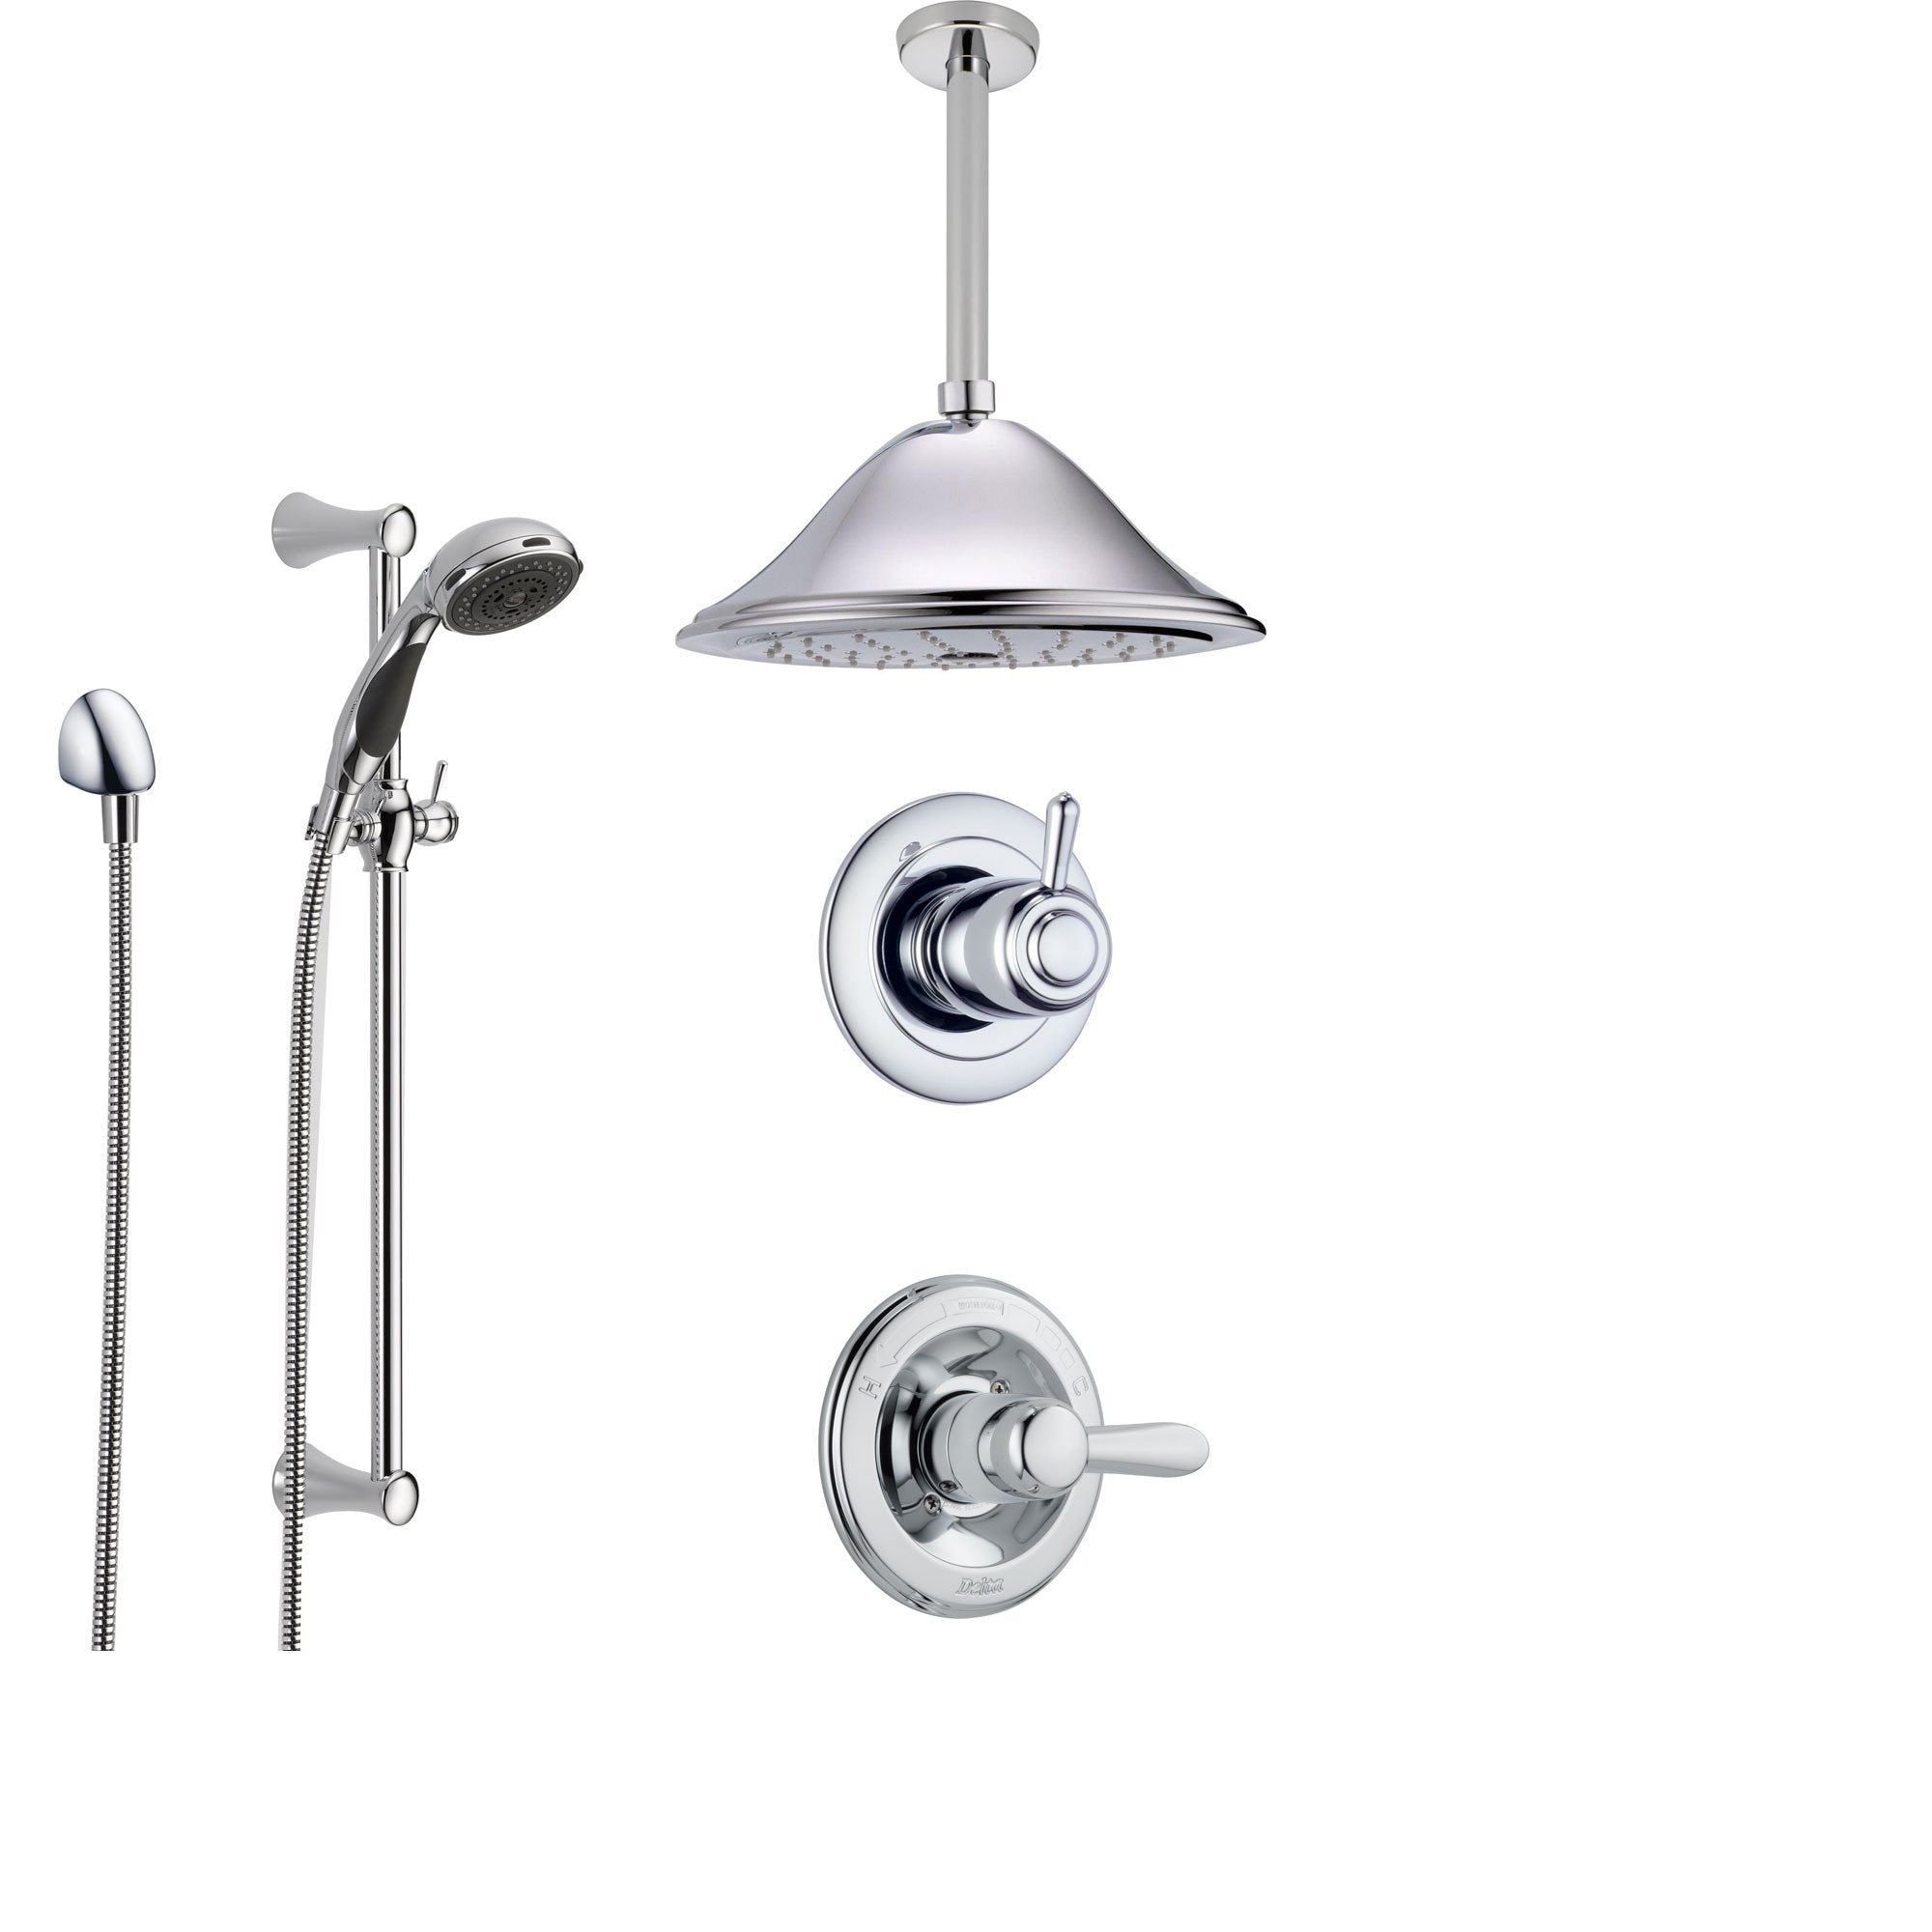 Delta Lahara Chrome Shower System with Normal Shower Handle, 3-setting Diverter, Large Ceiling Mount Rain Showerhead, and Handheld Shower SS143882